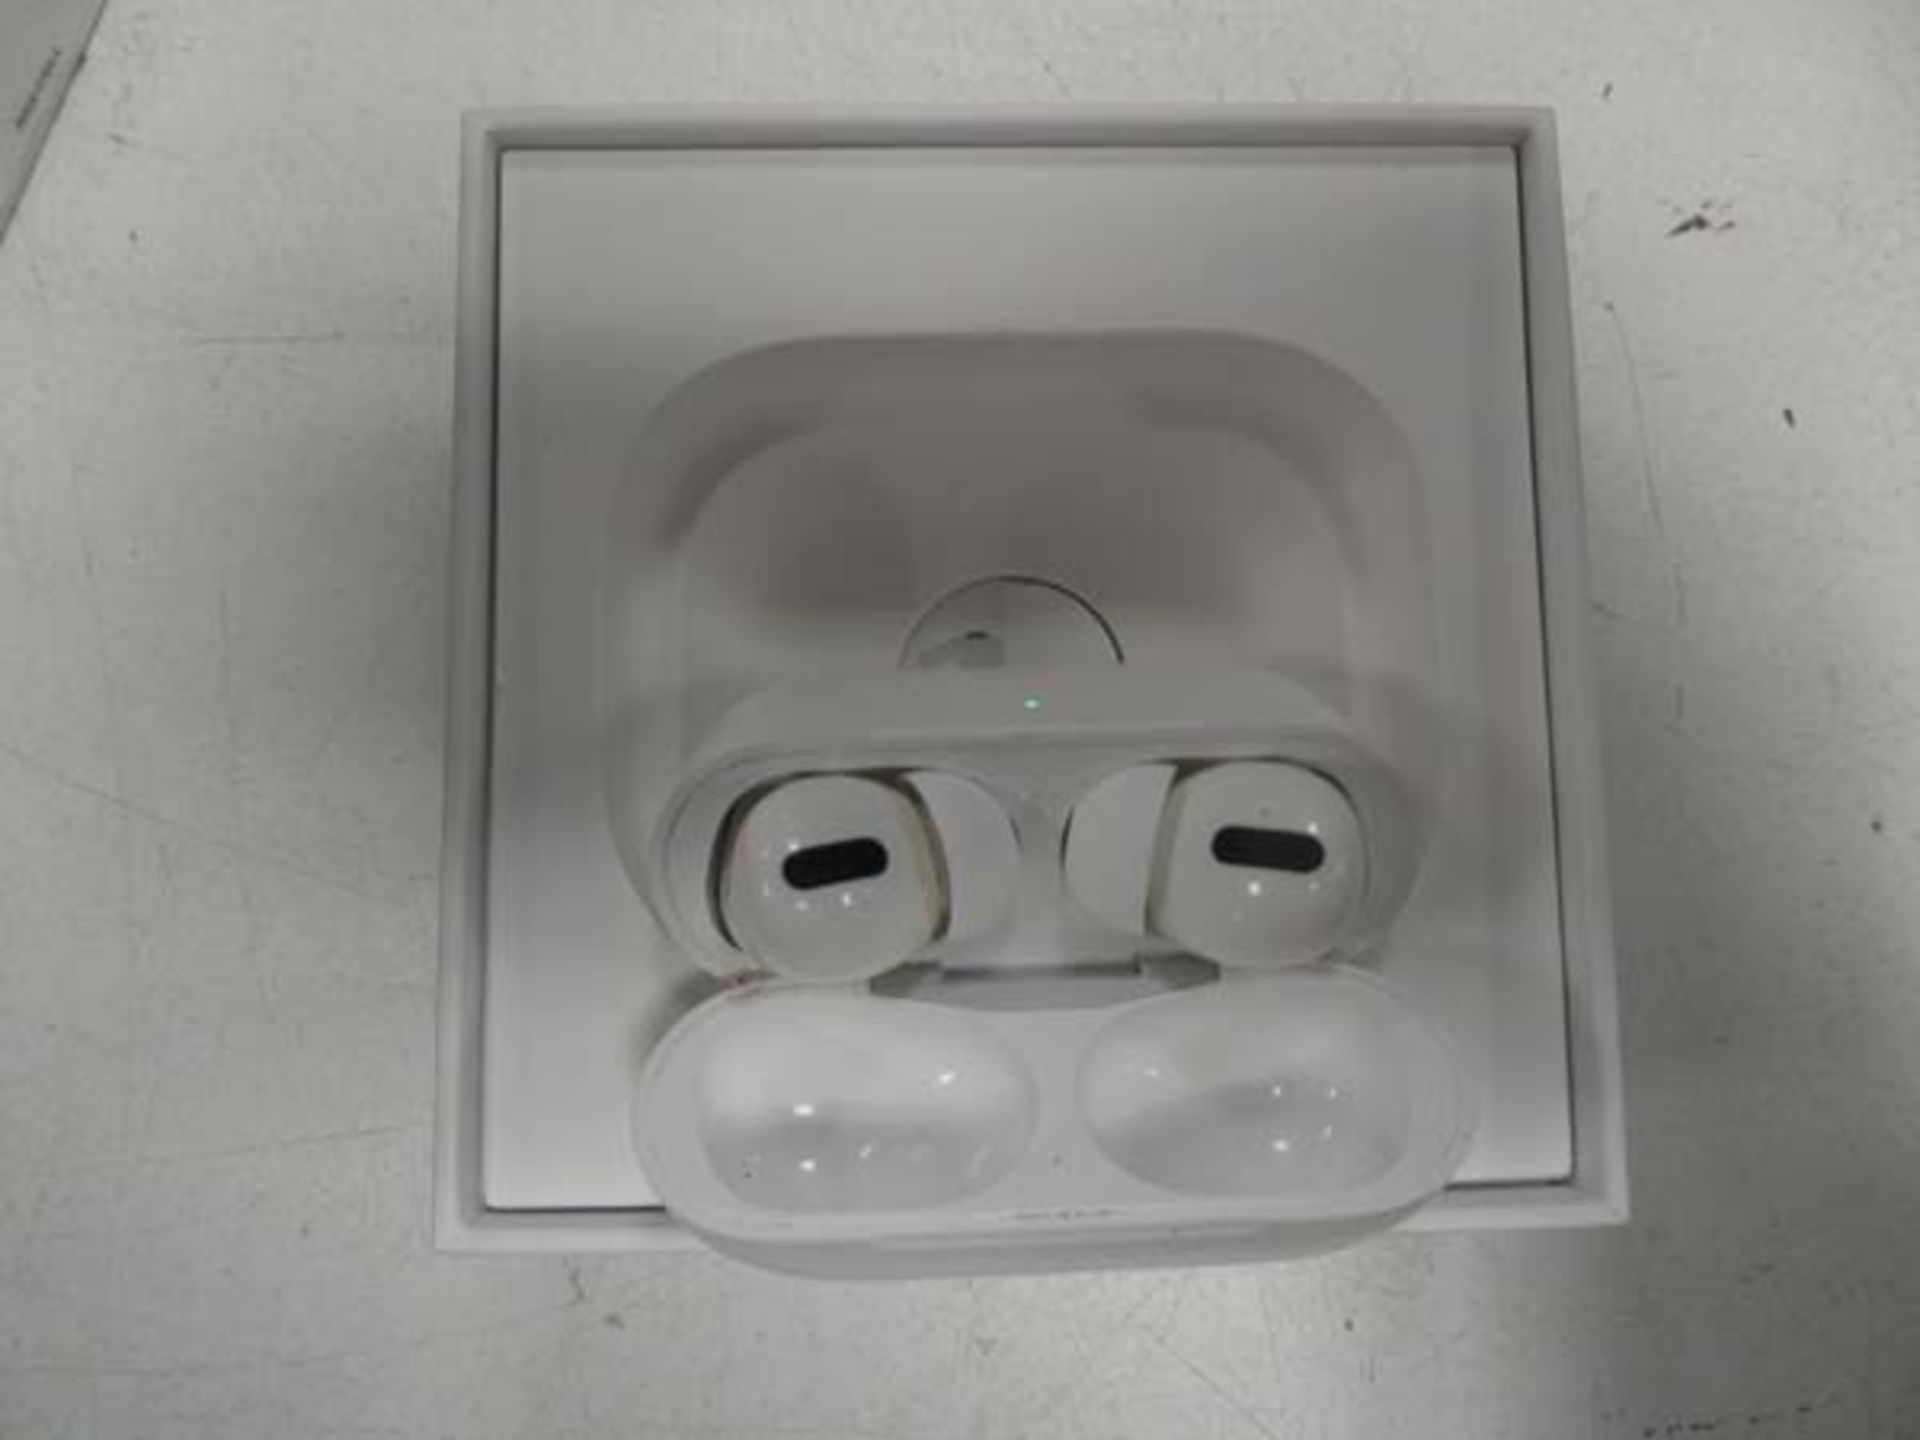 Apple Airpods Pro with wireless charging case and box